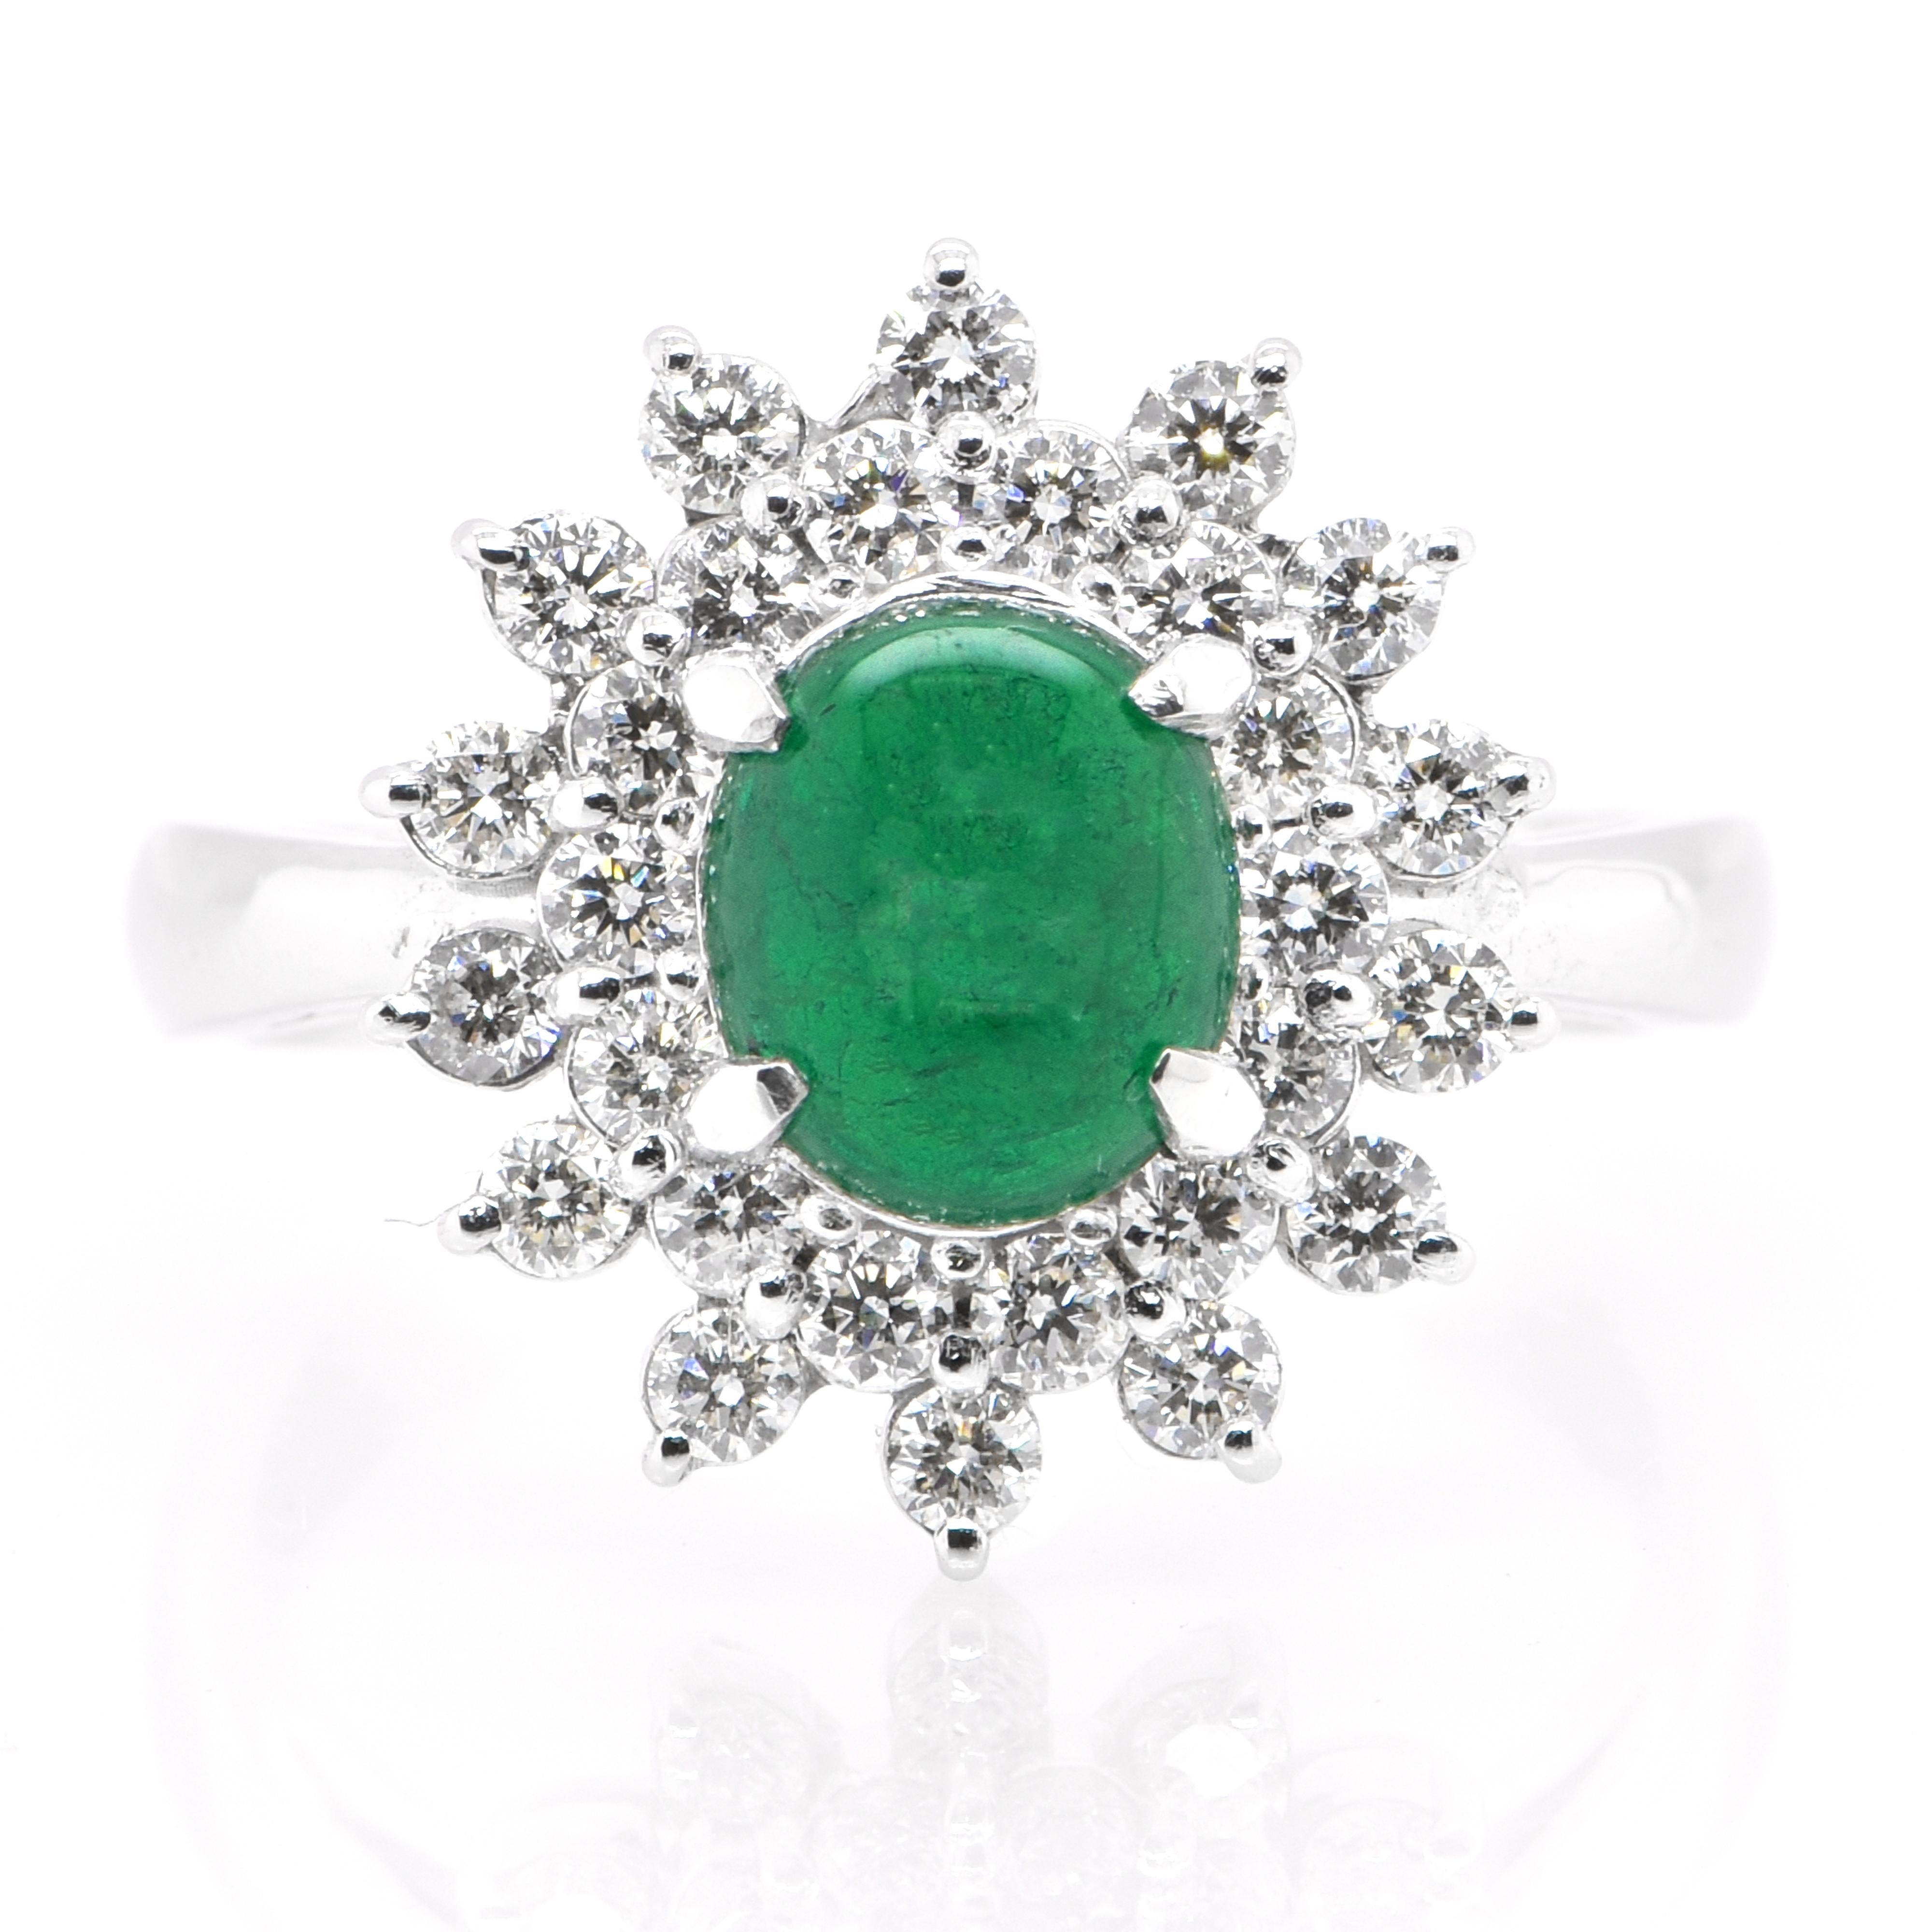 1.17 Carat Natural Emerald Cabochon and Diamond Ring Set in Platinum For Sale 3